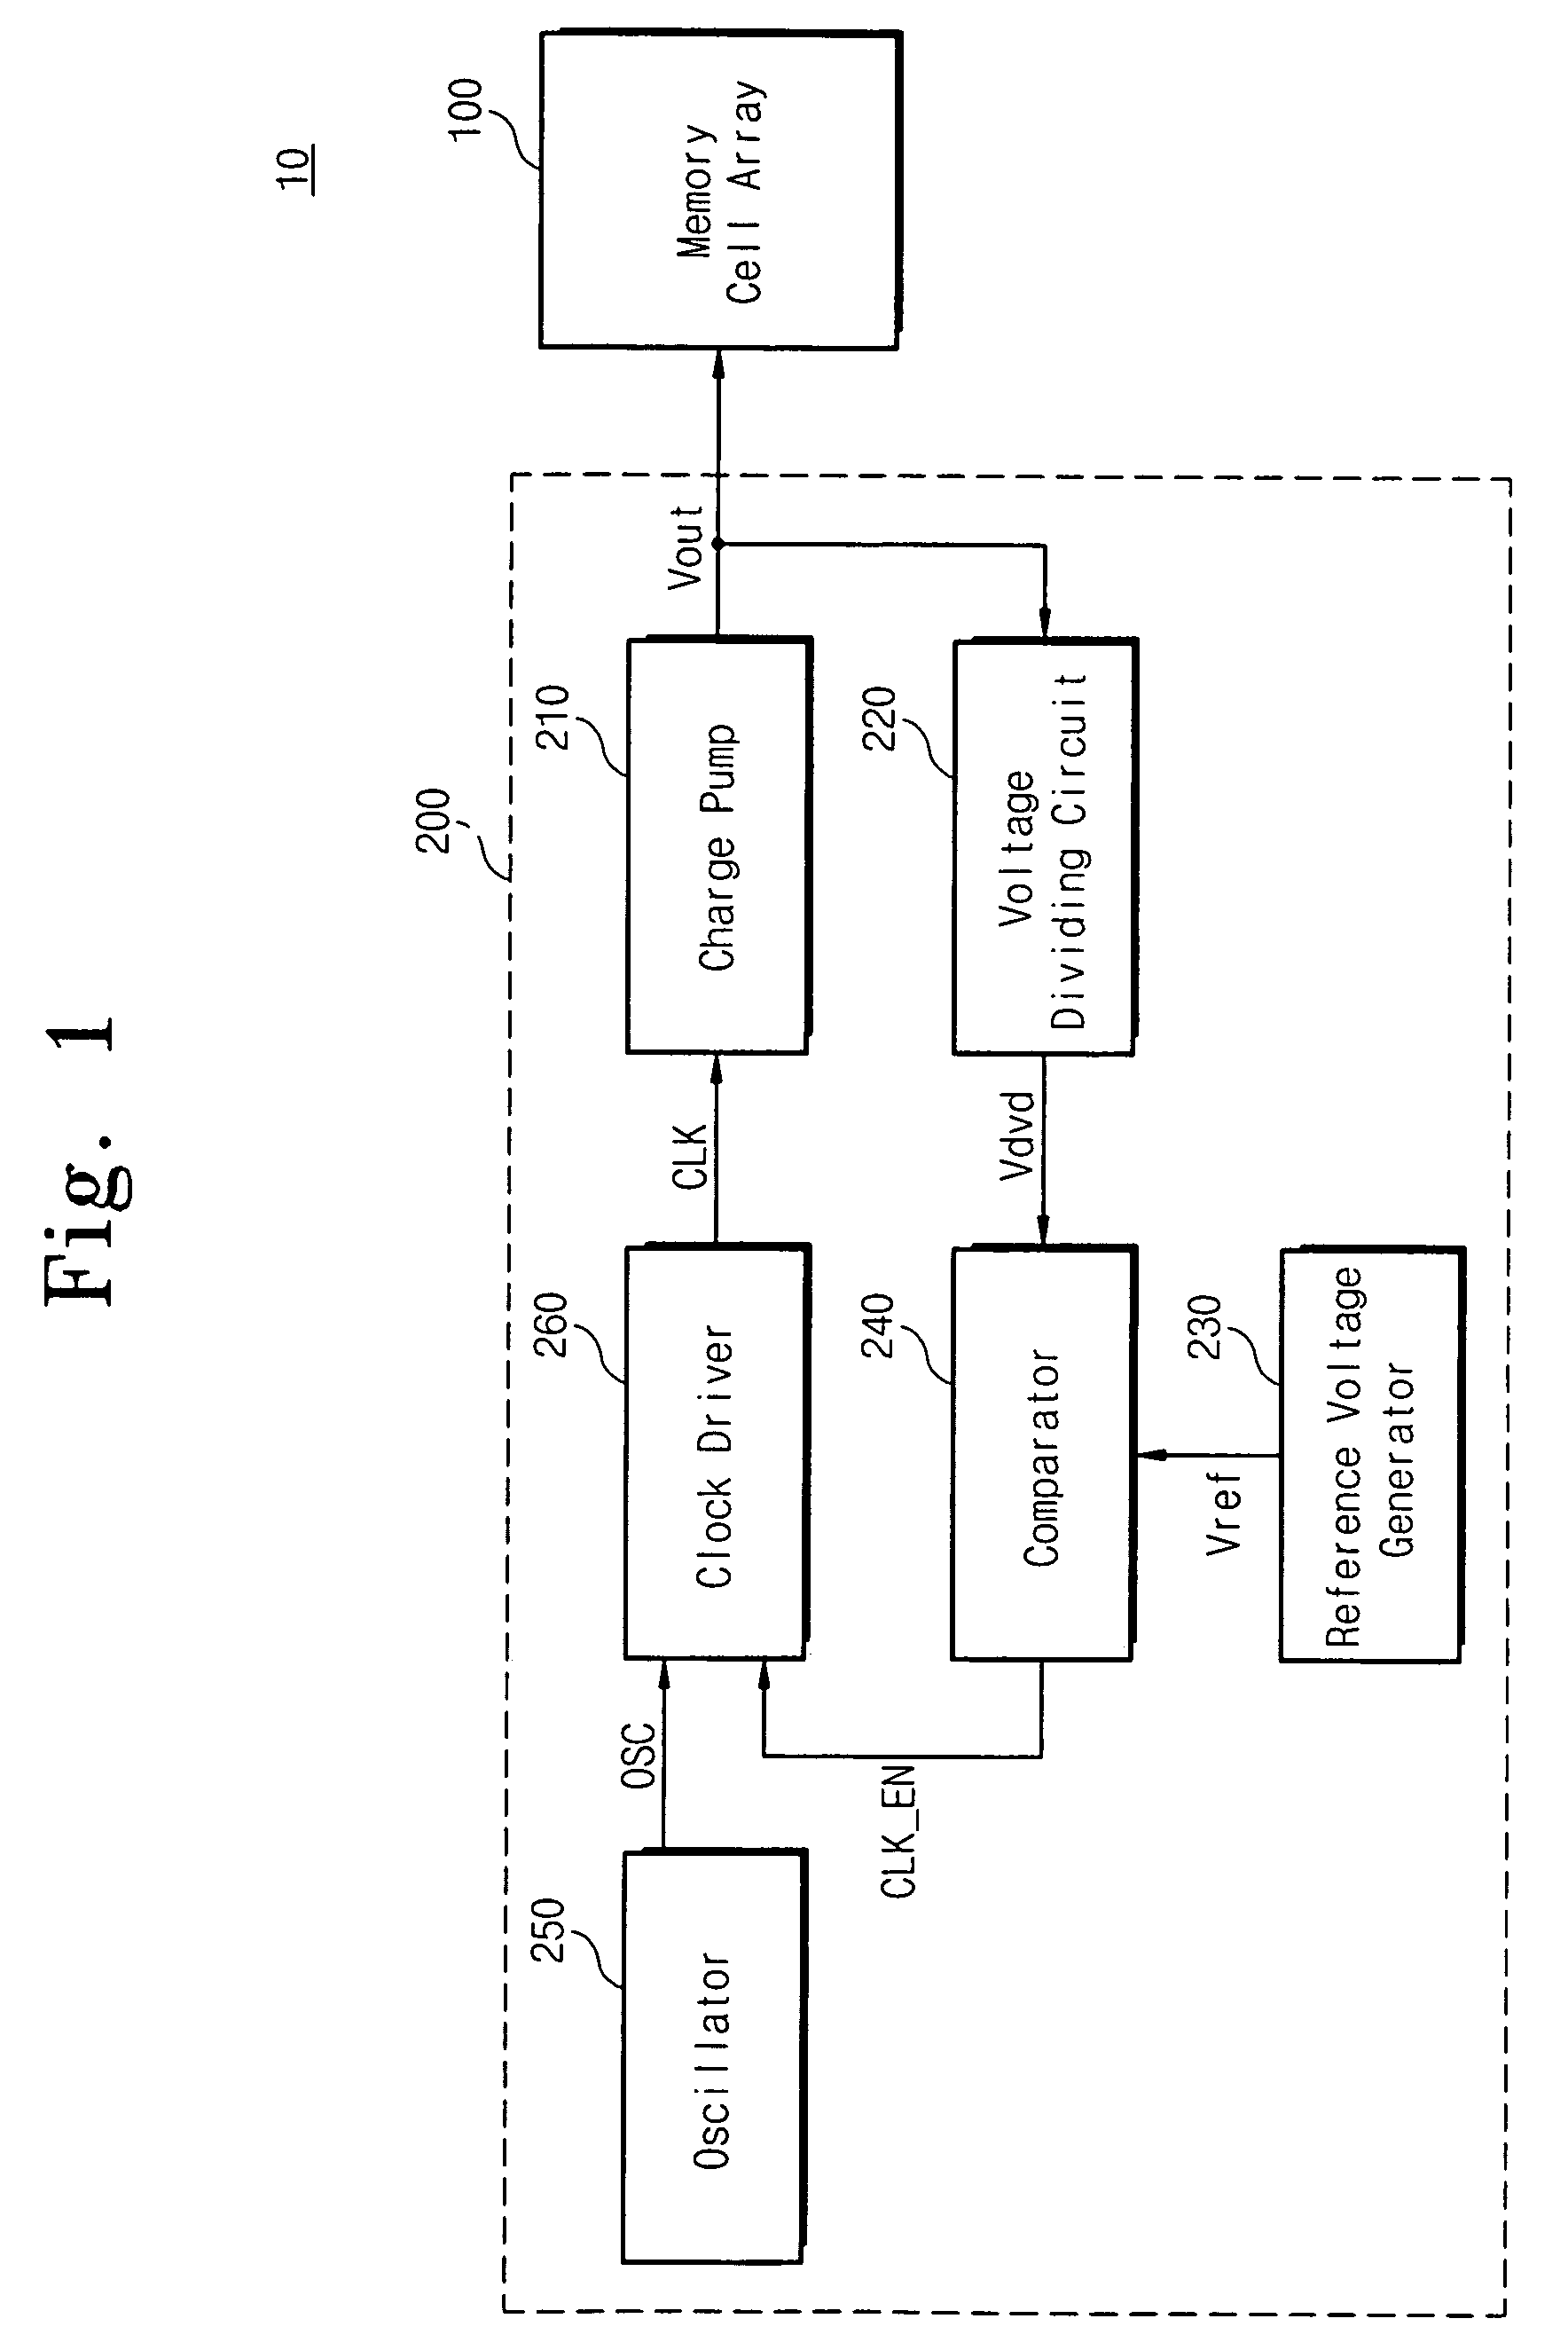 Wordline voltage generating circuit including a voltage dividing circuit for reducing effects of parasitic capacitance